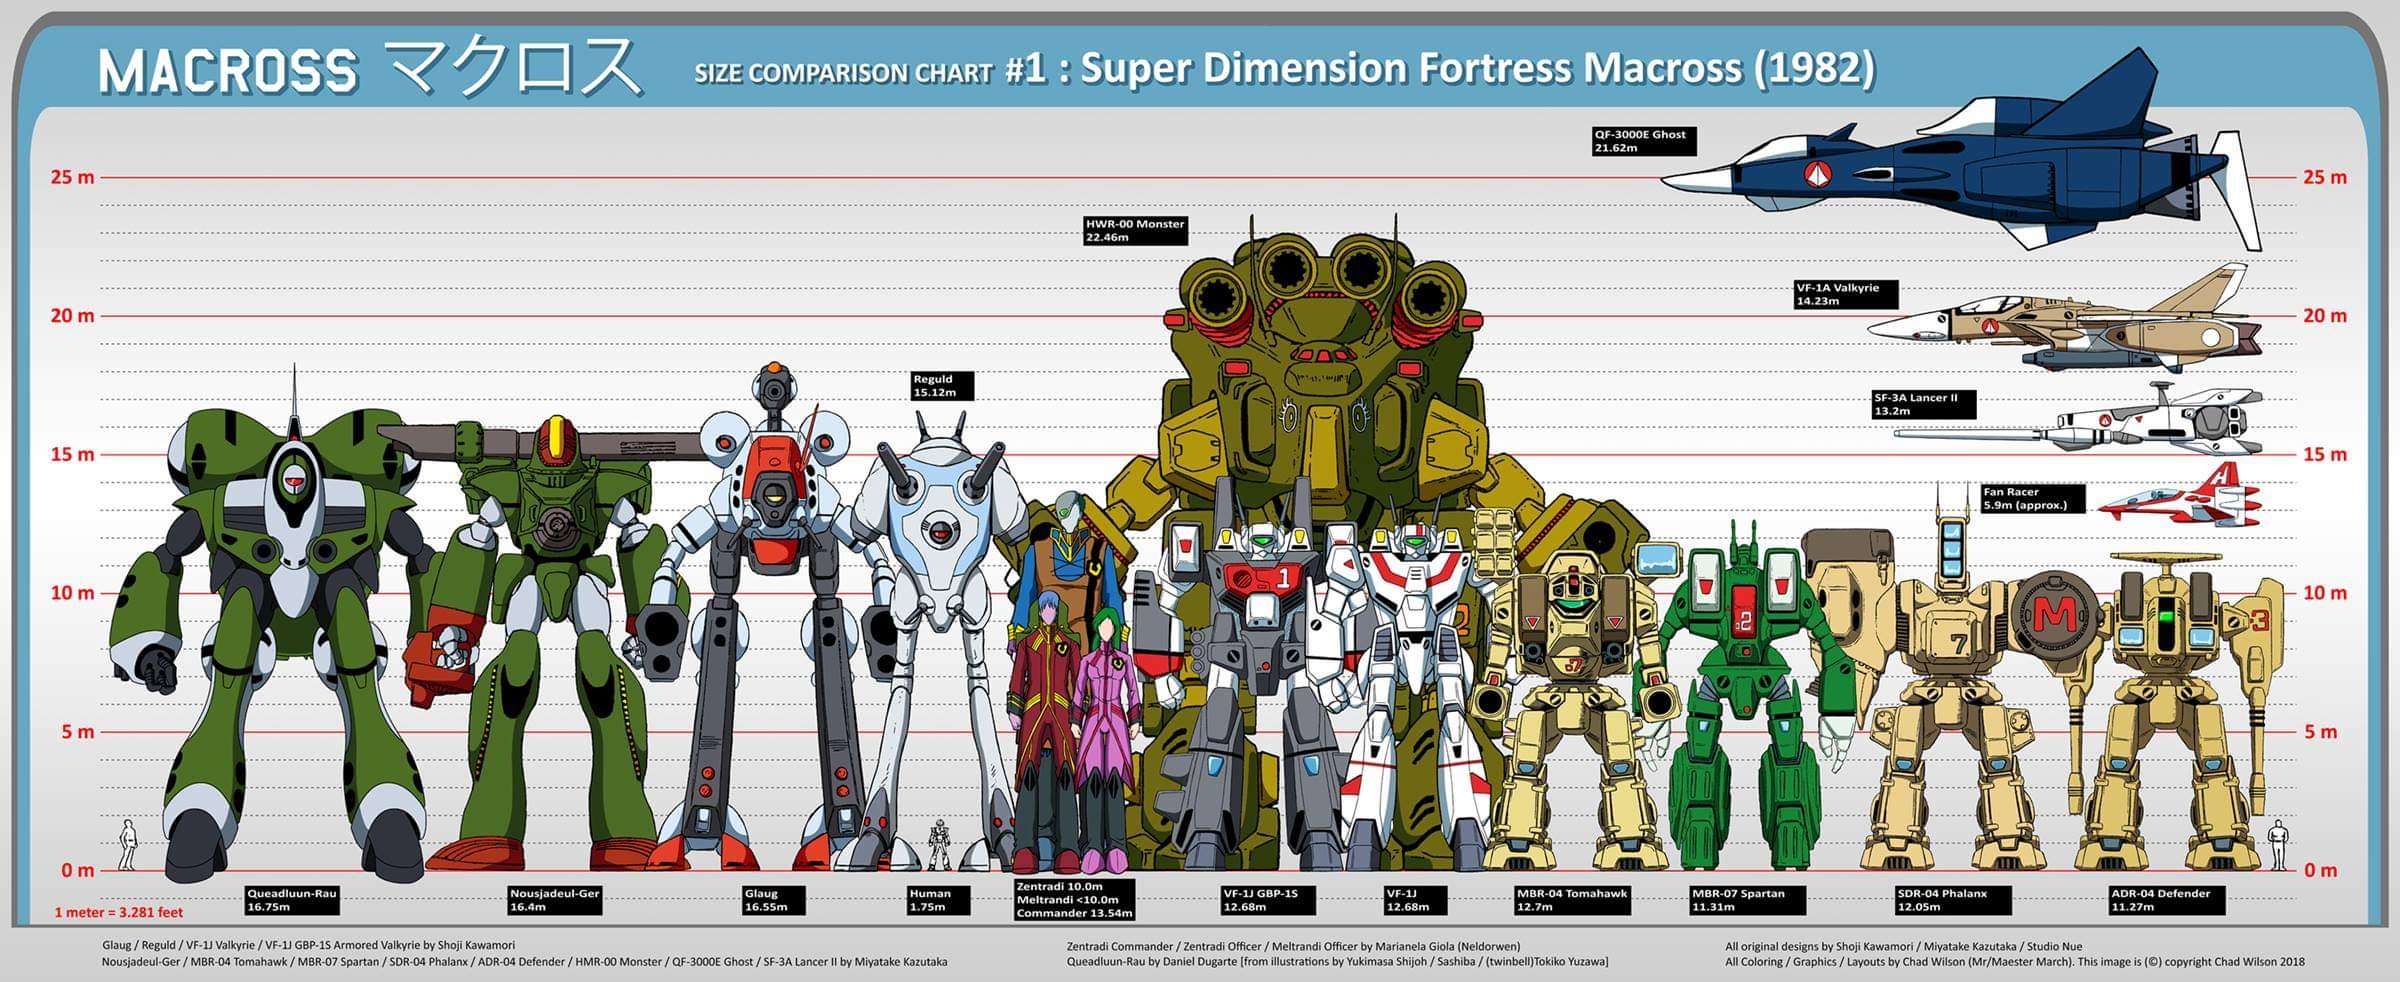 Sharing this lovely size comparison chart from. 